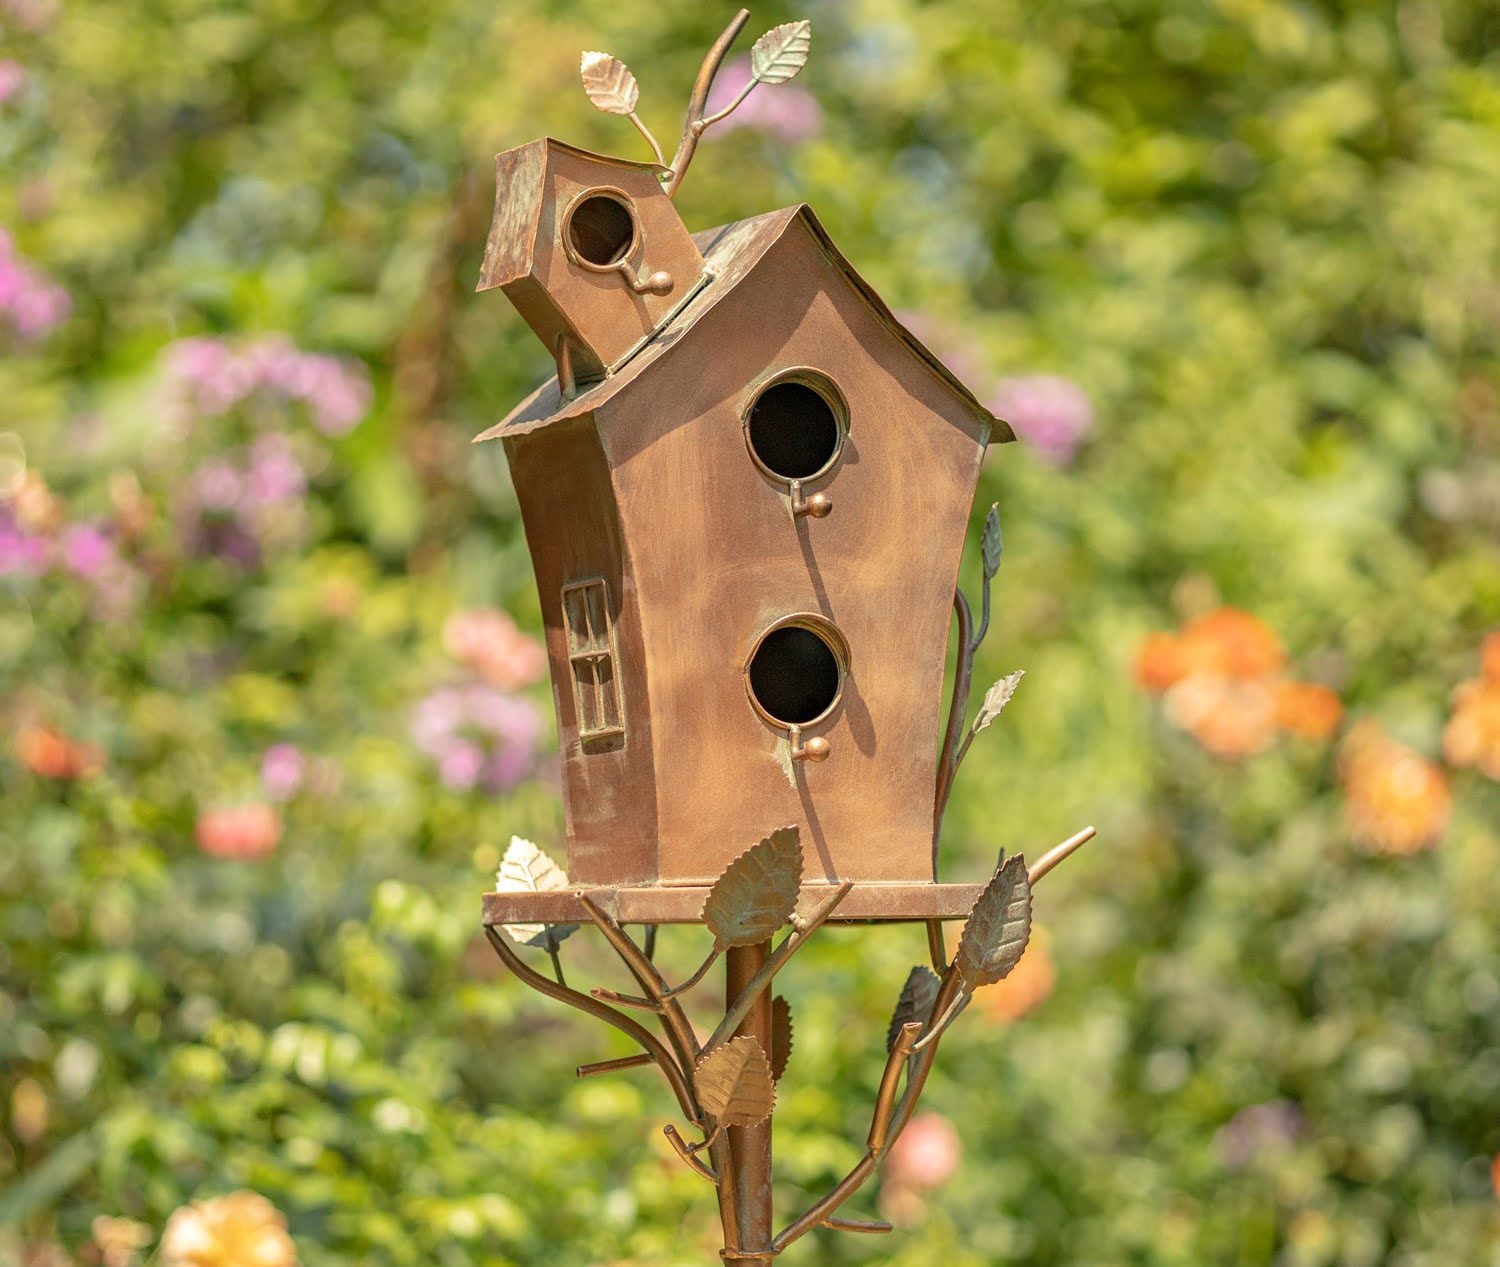 Birdhouse Review: The Perfect Home for Your Feathered Friends